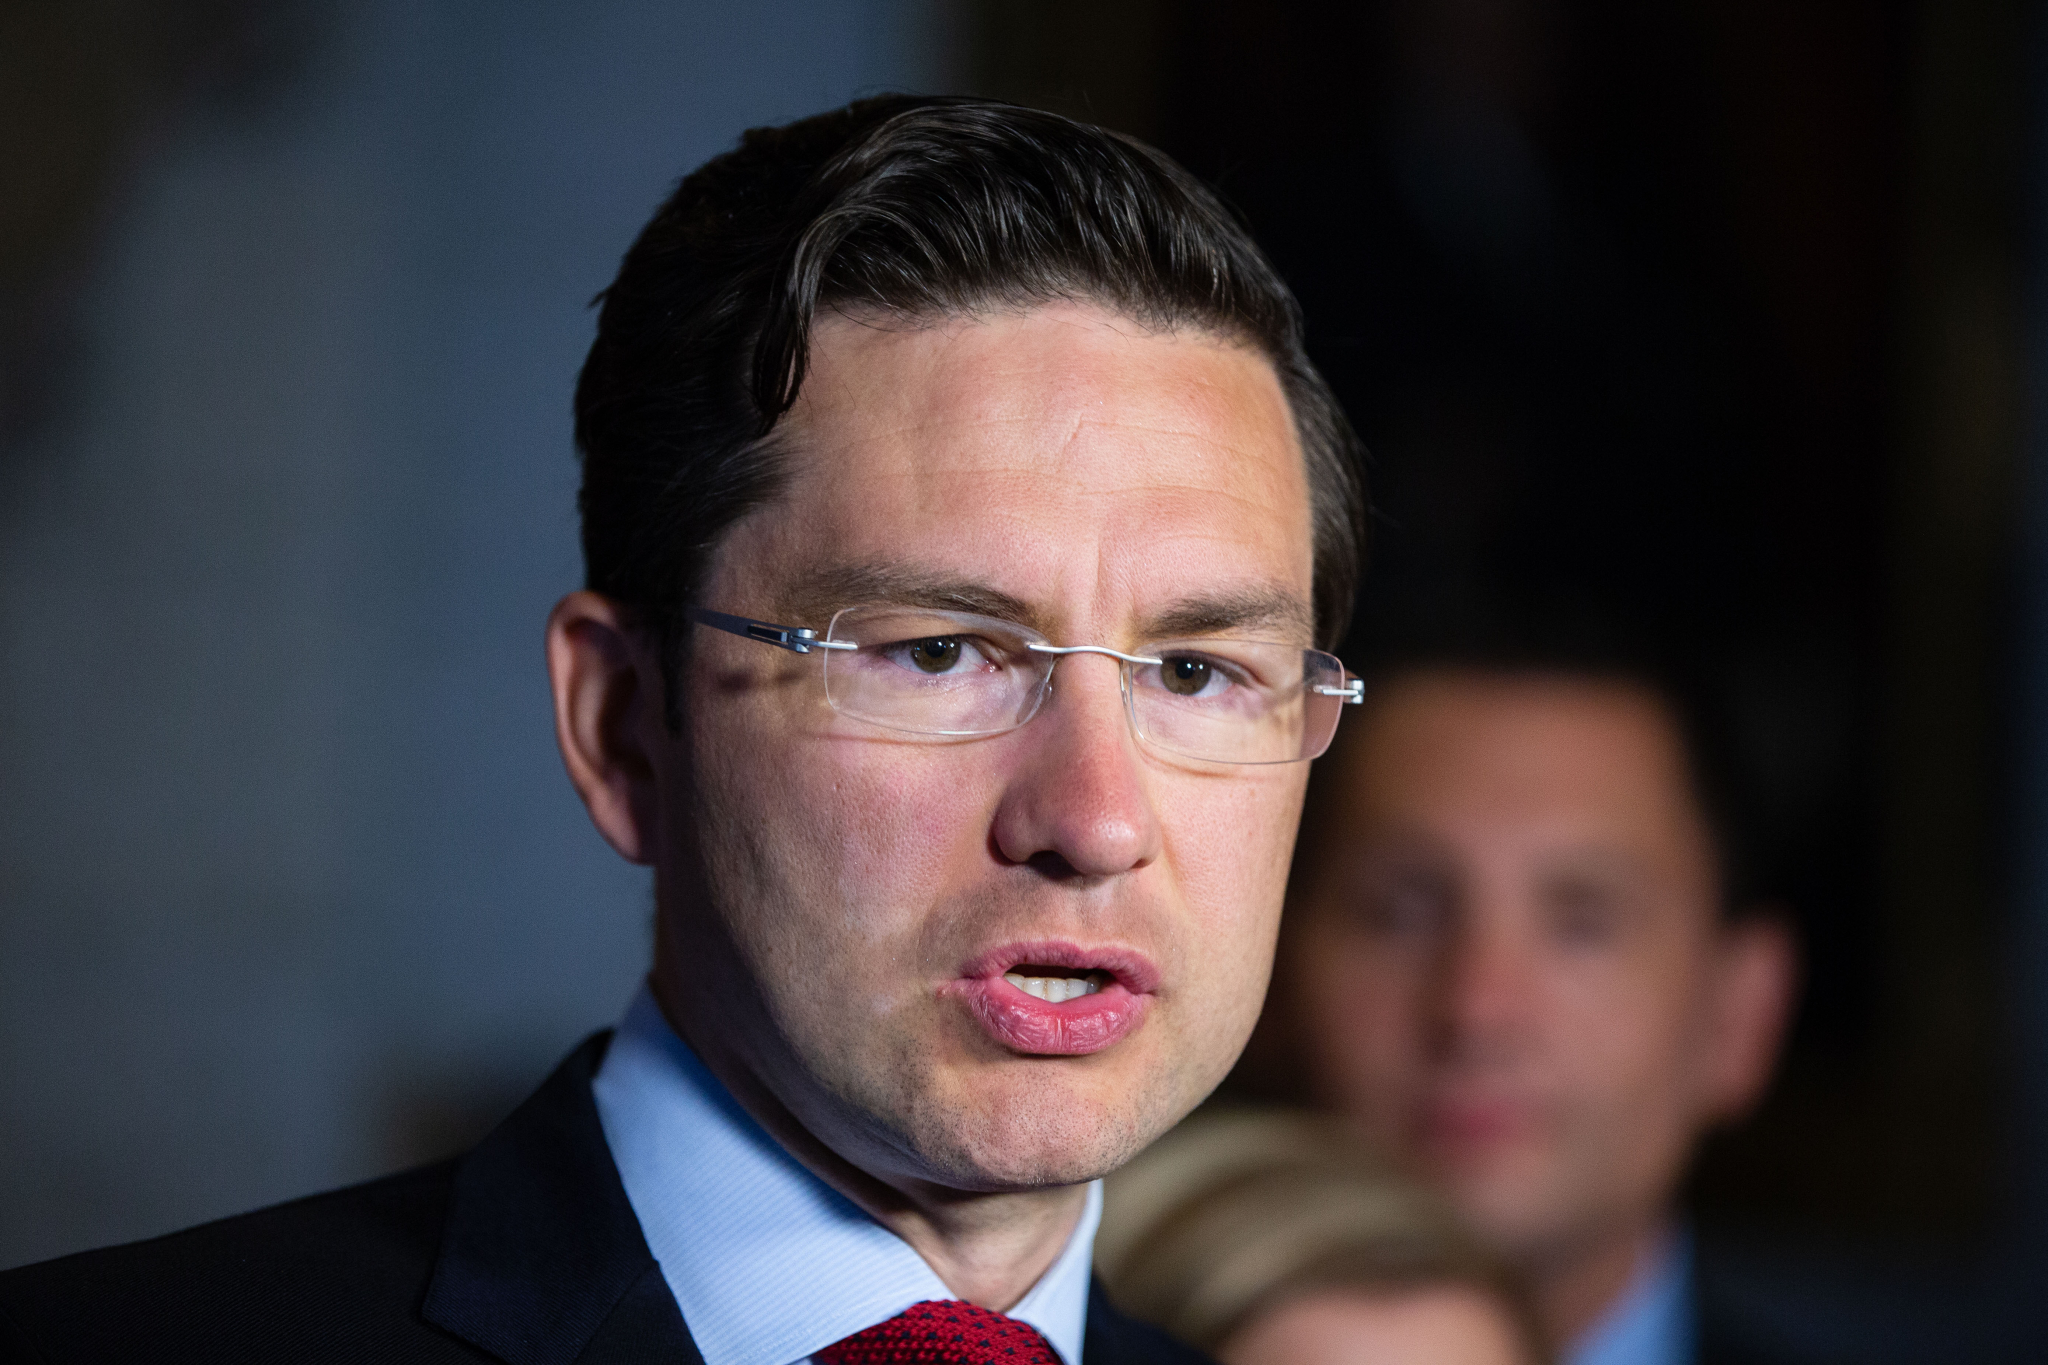 inflation-taxes-and-cryptocurrency-poilievre-takes-aim-at-liberals-in-first-question-period-as-opposition-leader